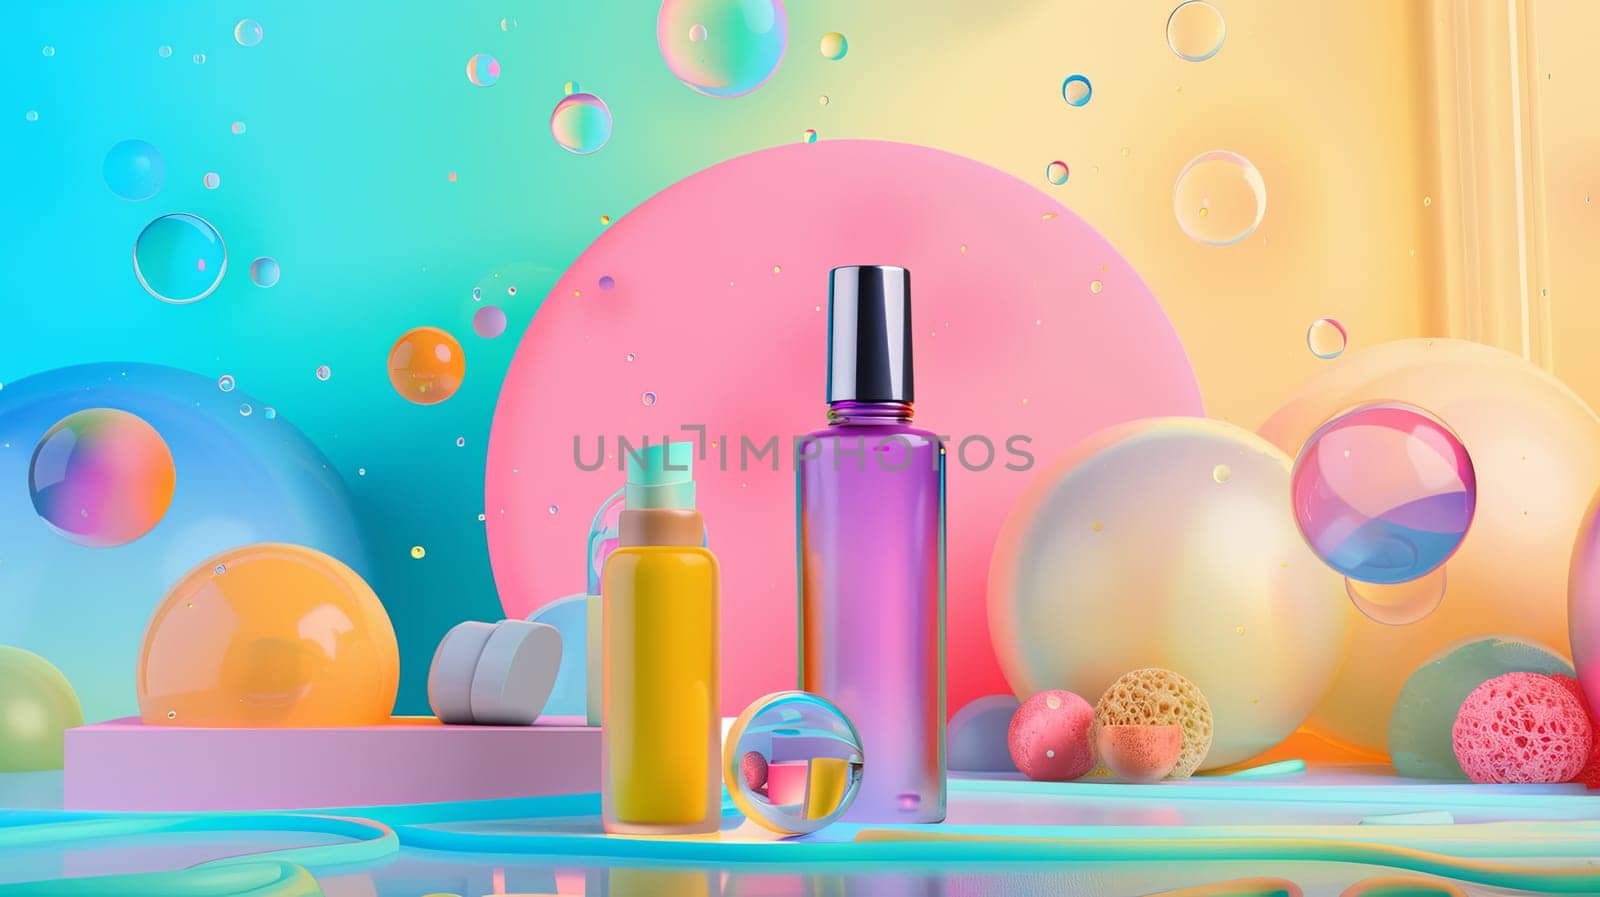 A bottle of lotion and another bottle of lotion placed on a table in a room with abstract colorful backgrounds, suitable for cosmetic brand promotions.